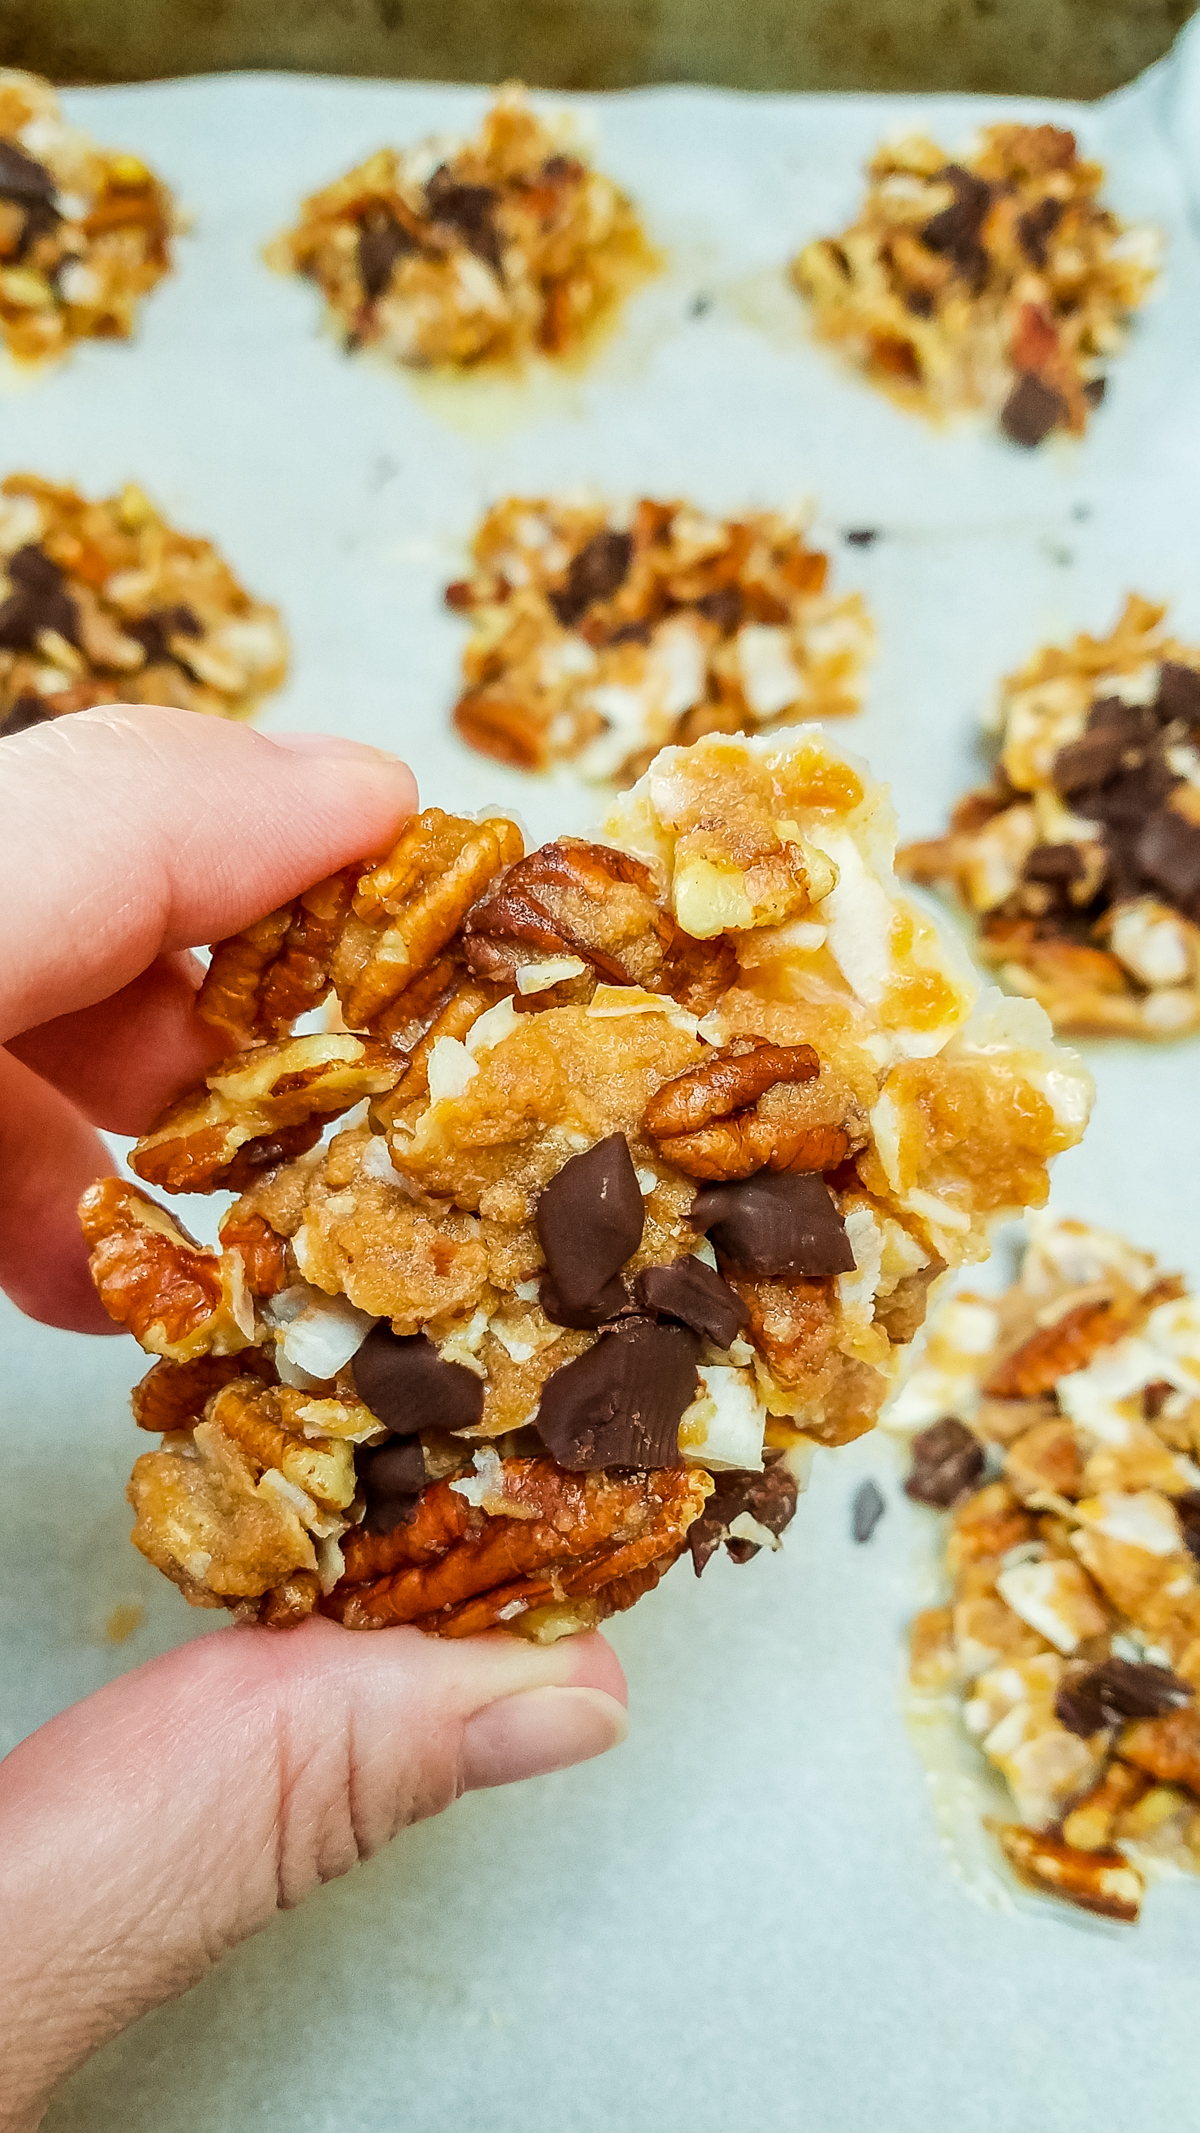 holding a keto sugar free praline made with pecans, almonds and coconut